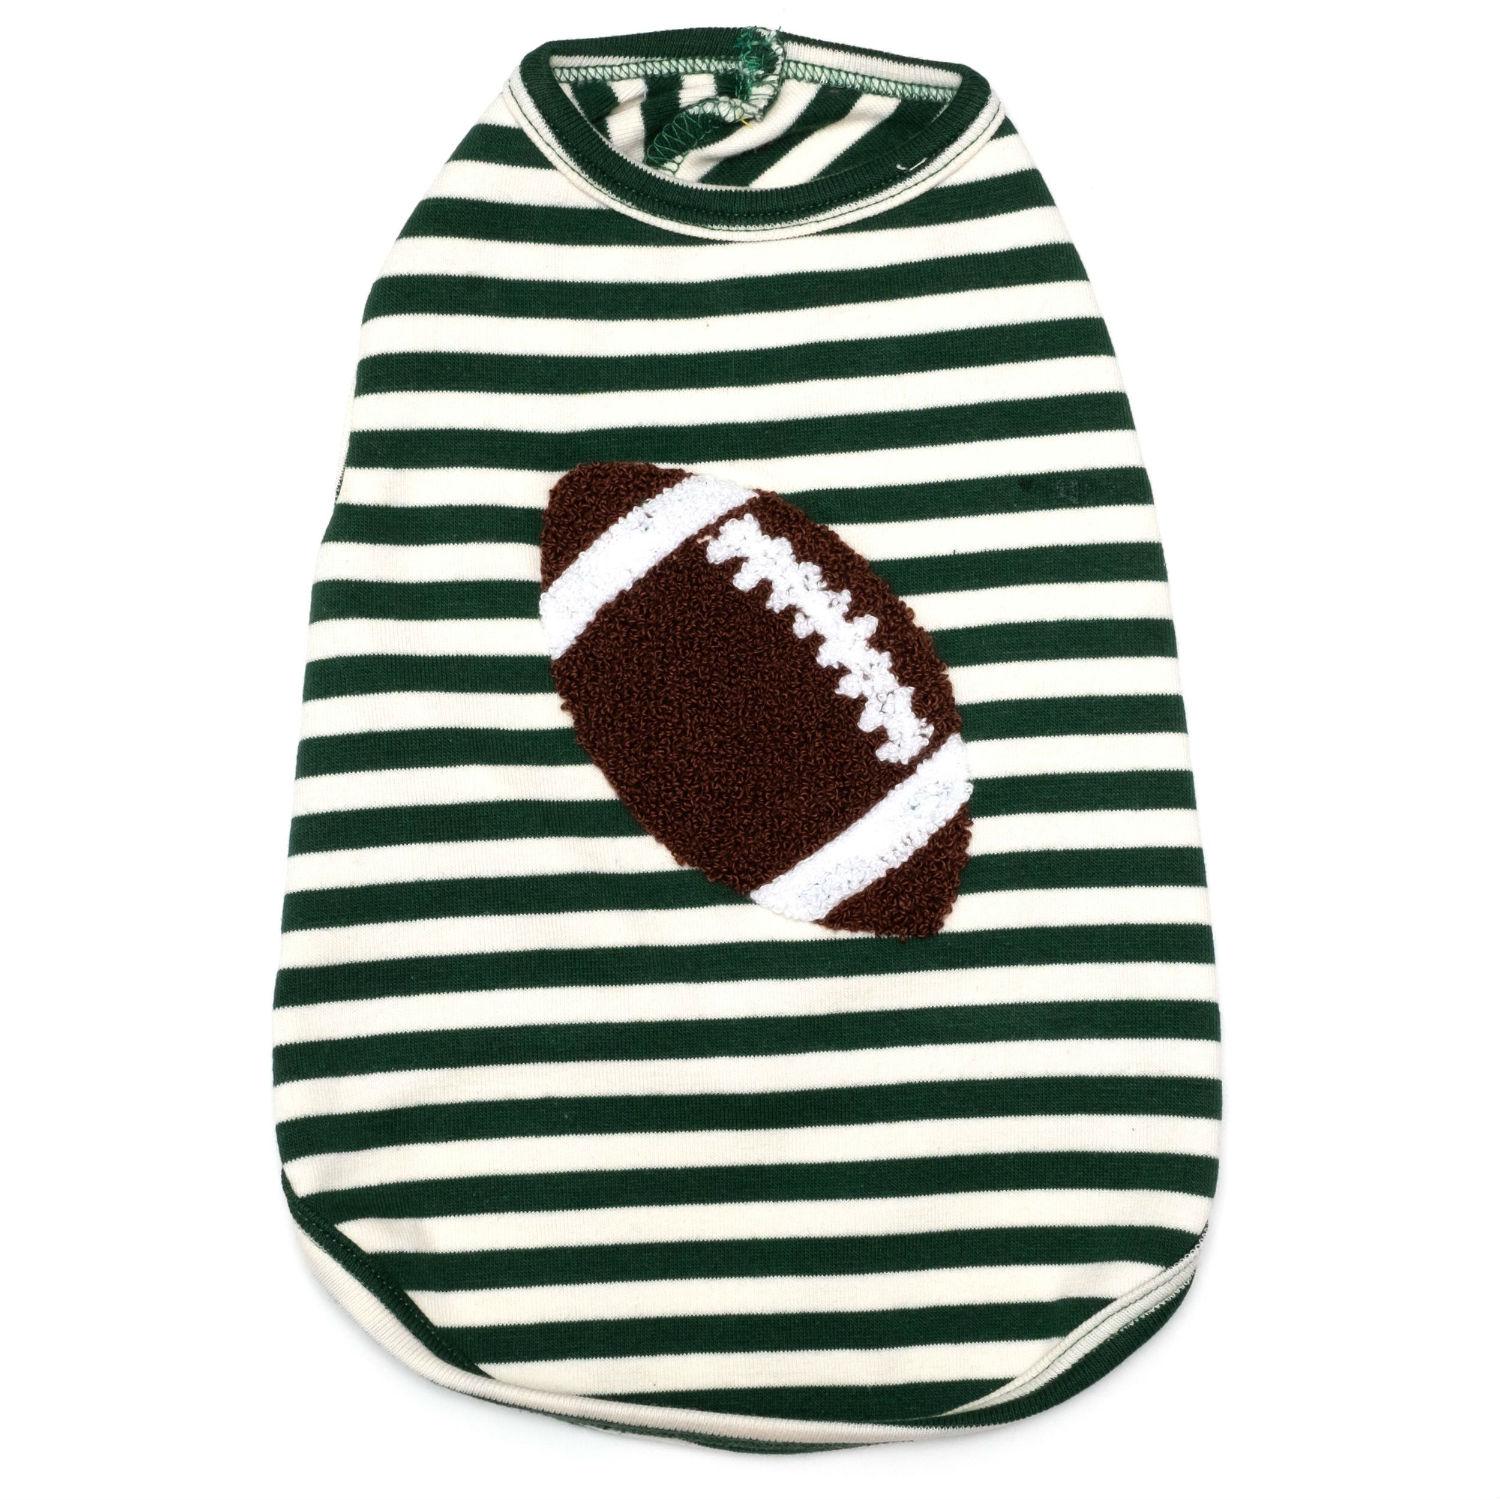 Worthy Dog Football Dog T-Shirt - Green and White Striped